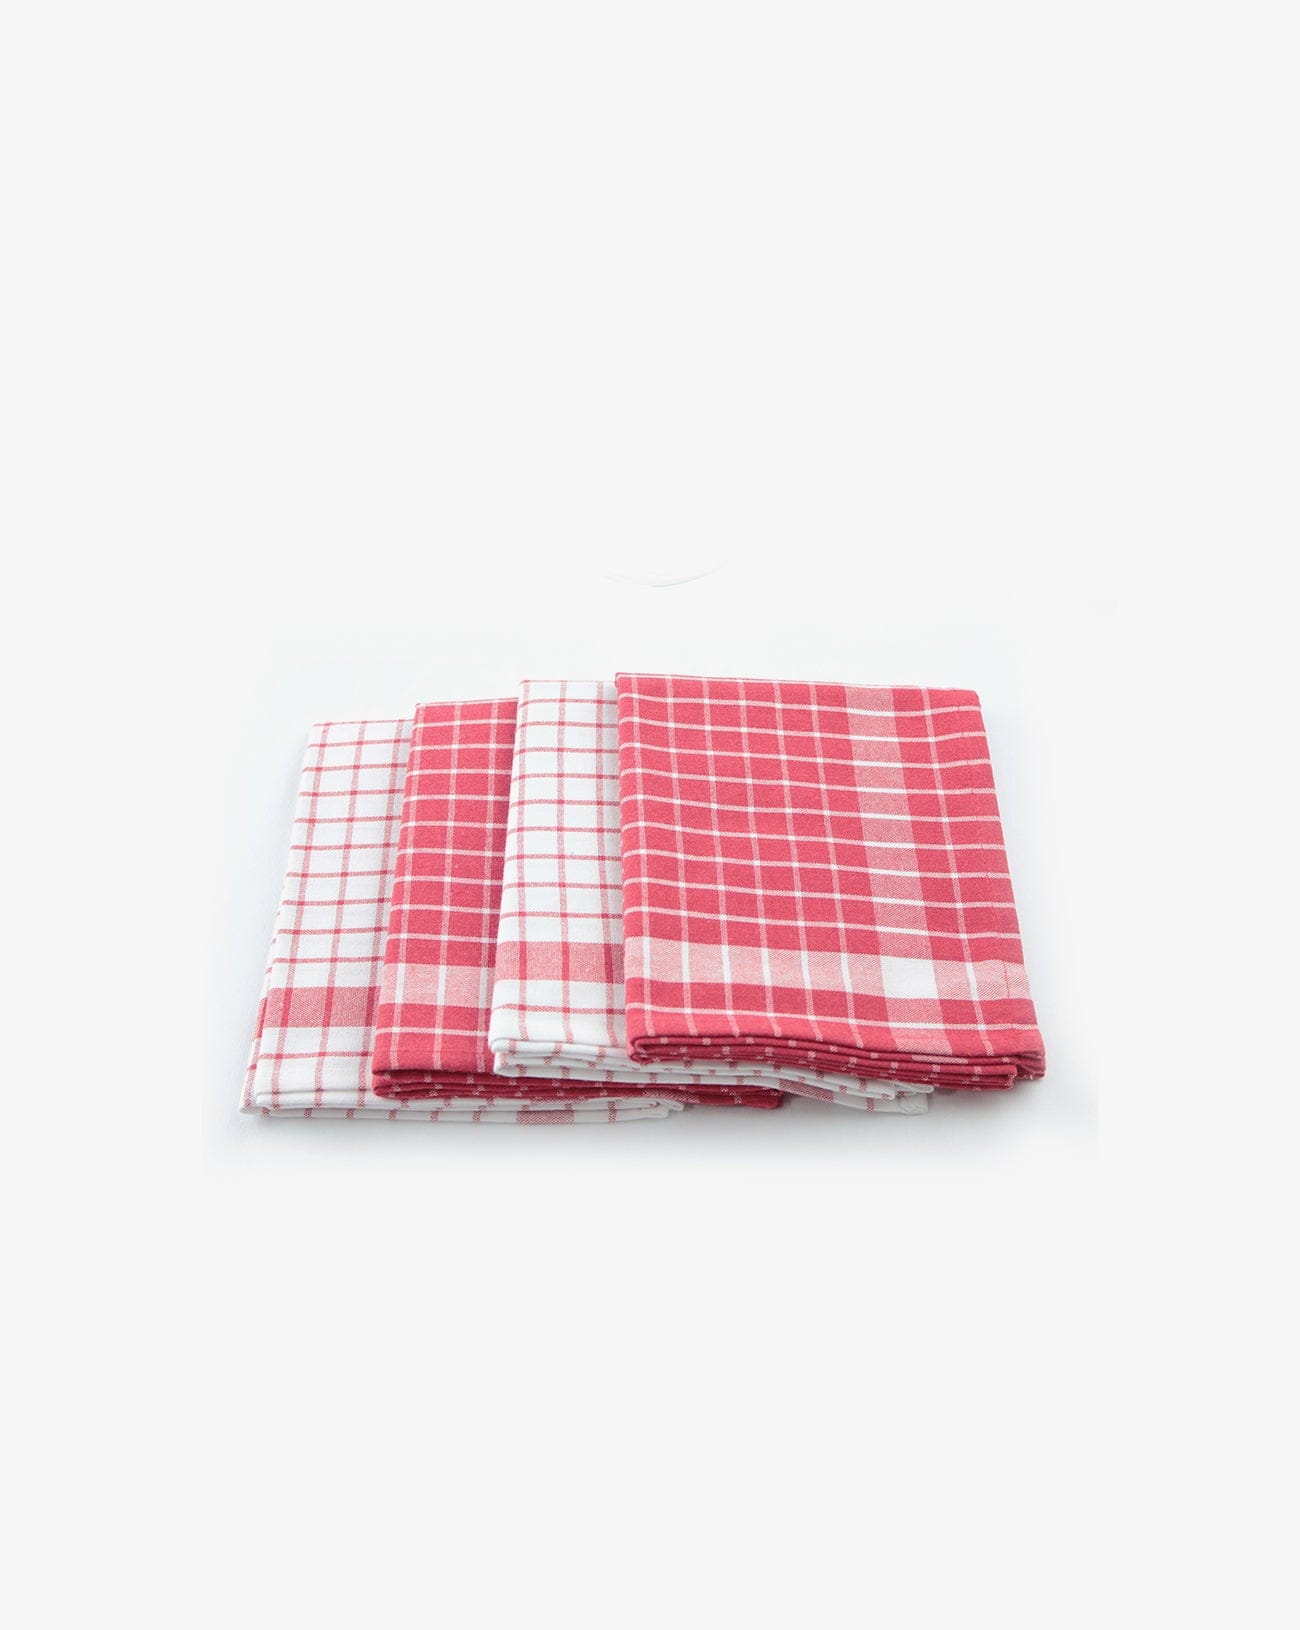 2pc Cotton Yarndye Green Plaid Kitchen Towel Farmhouse Chic by Threshold  Collection 